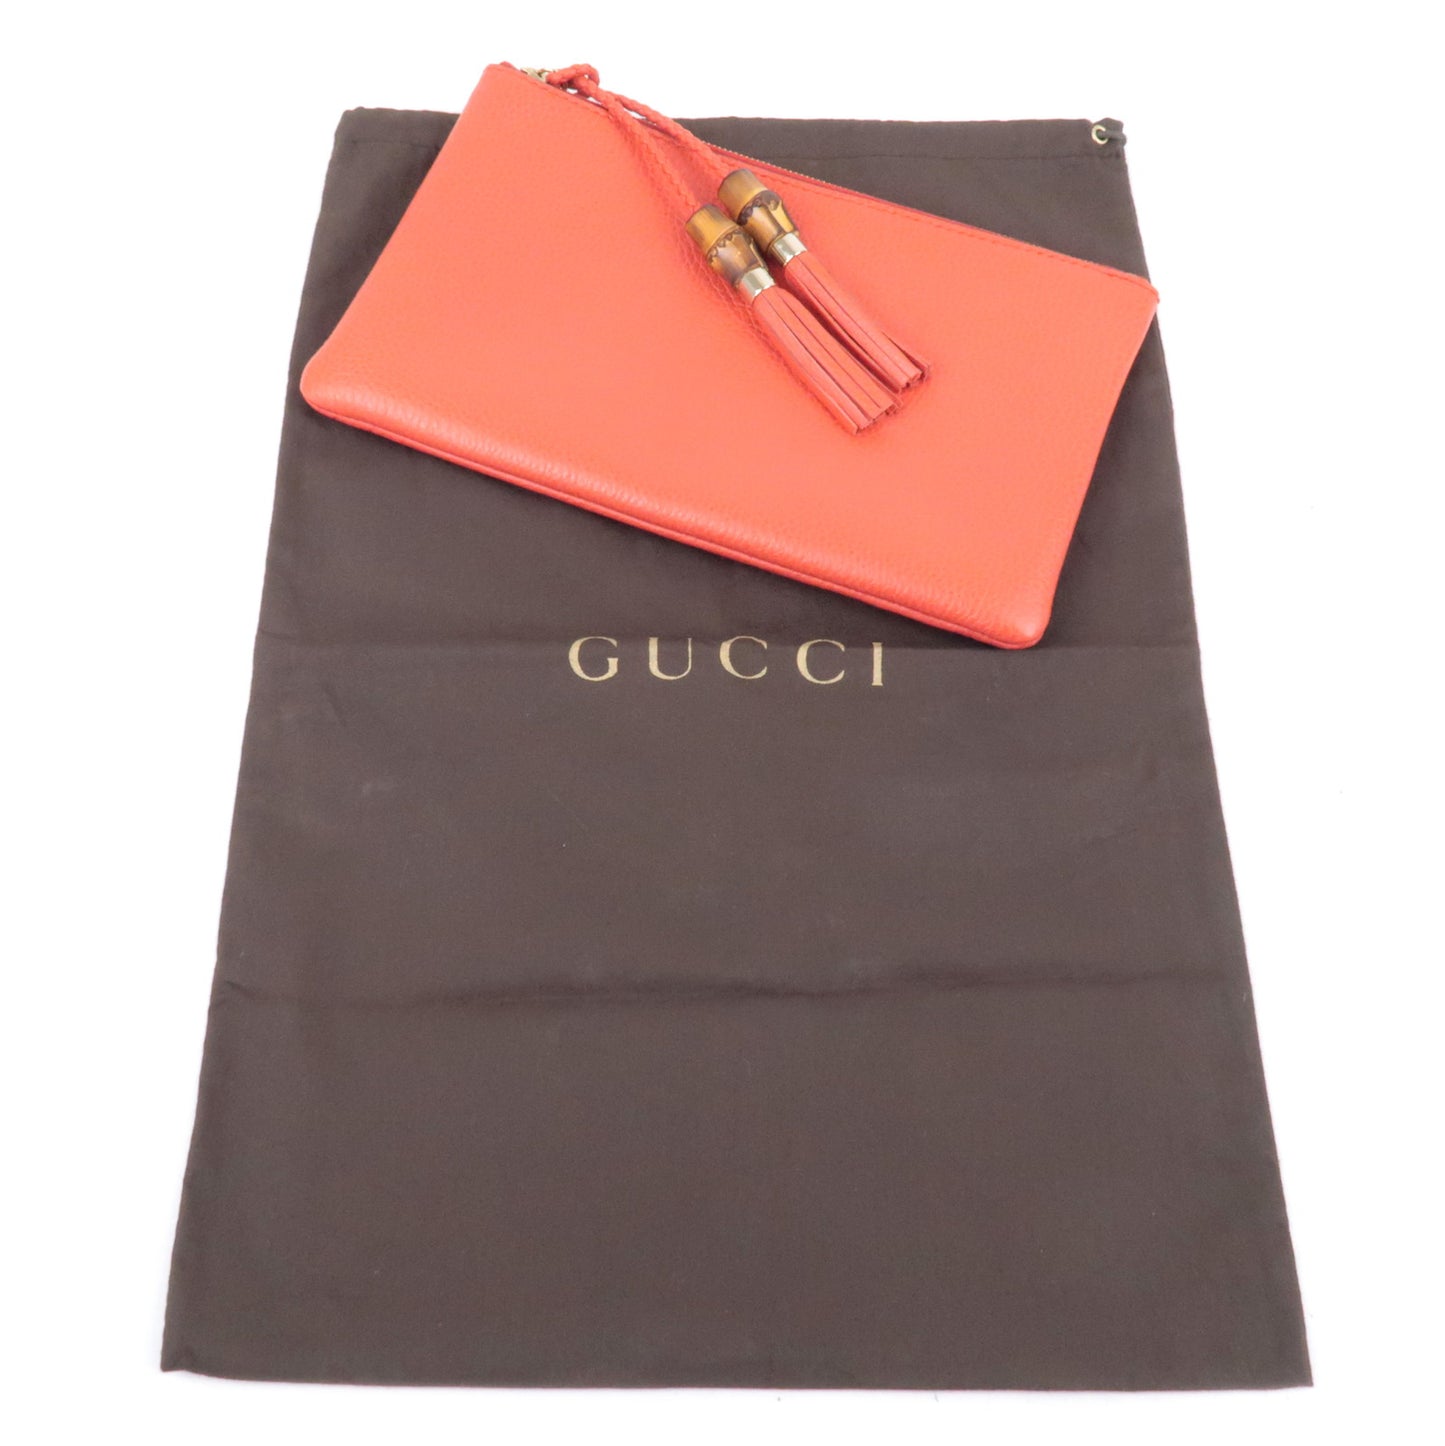 GUCCI Leather Bamboo Pouch Clutch Bag Red 376854